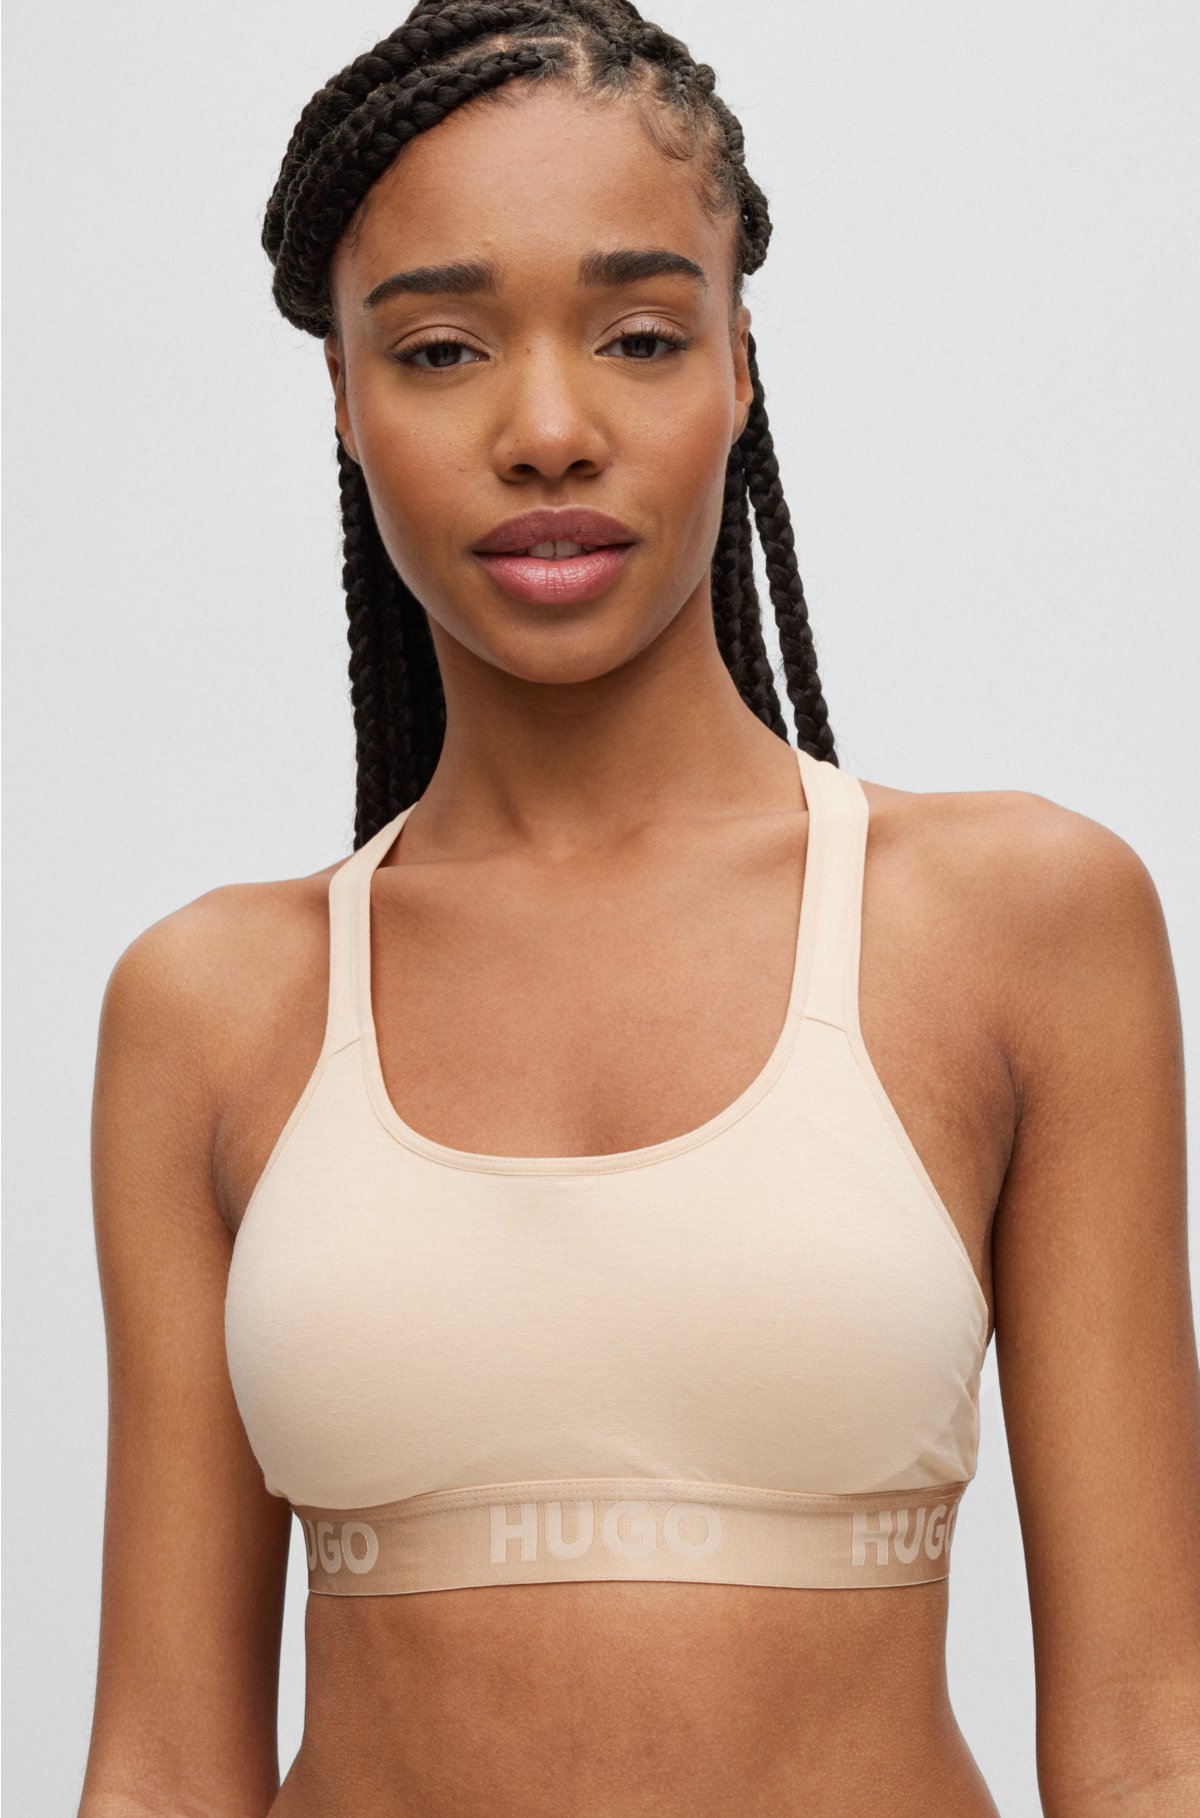 stretch repeat in with - cotton logos HUGO Bralette